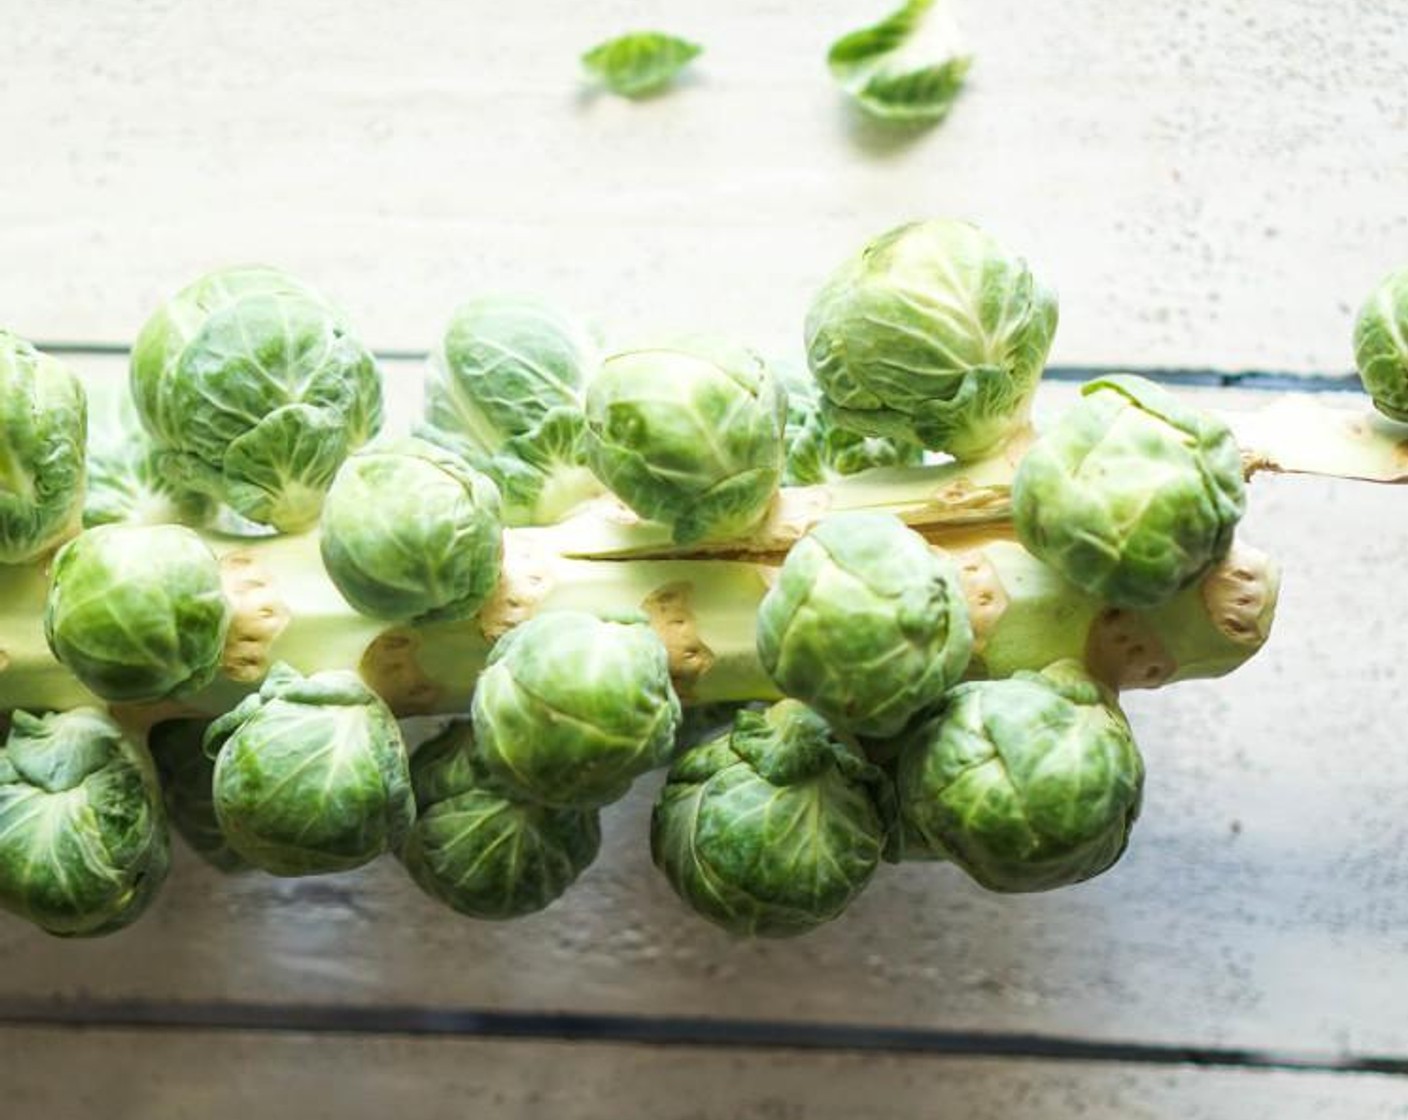 step 2 Clean the Brussels Sprouts (5 cups) by gently rinsing with water then pat dry with a paper towel. Remove any damaged or bruised outer layer leaves and discard.